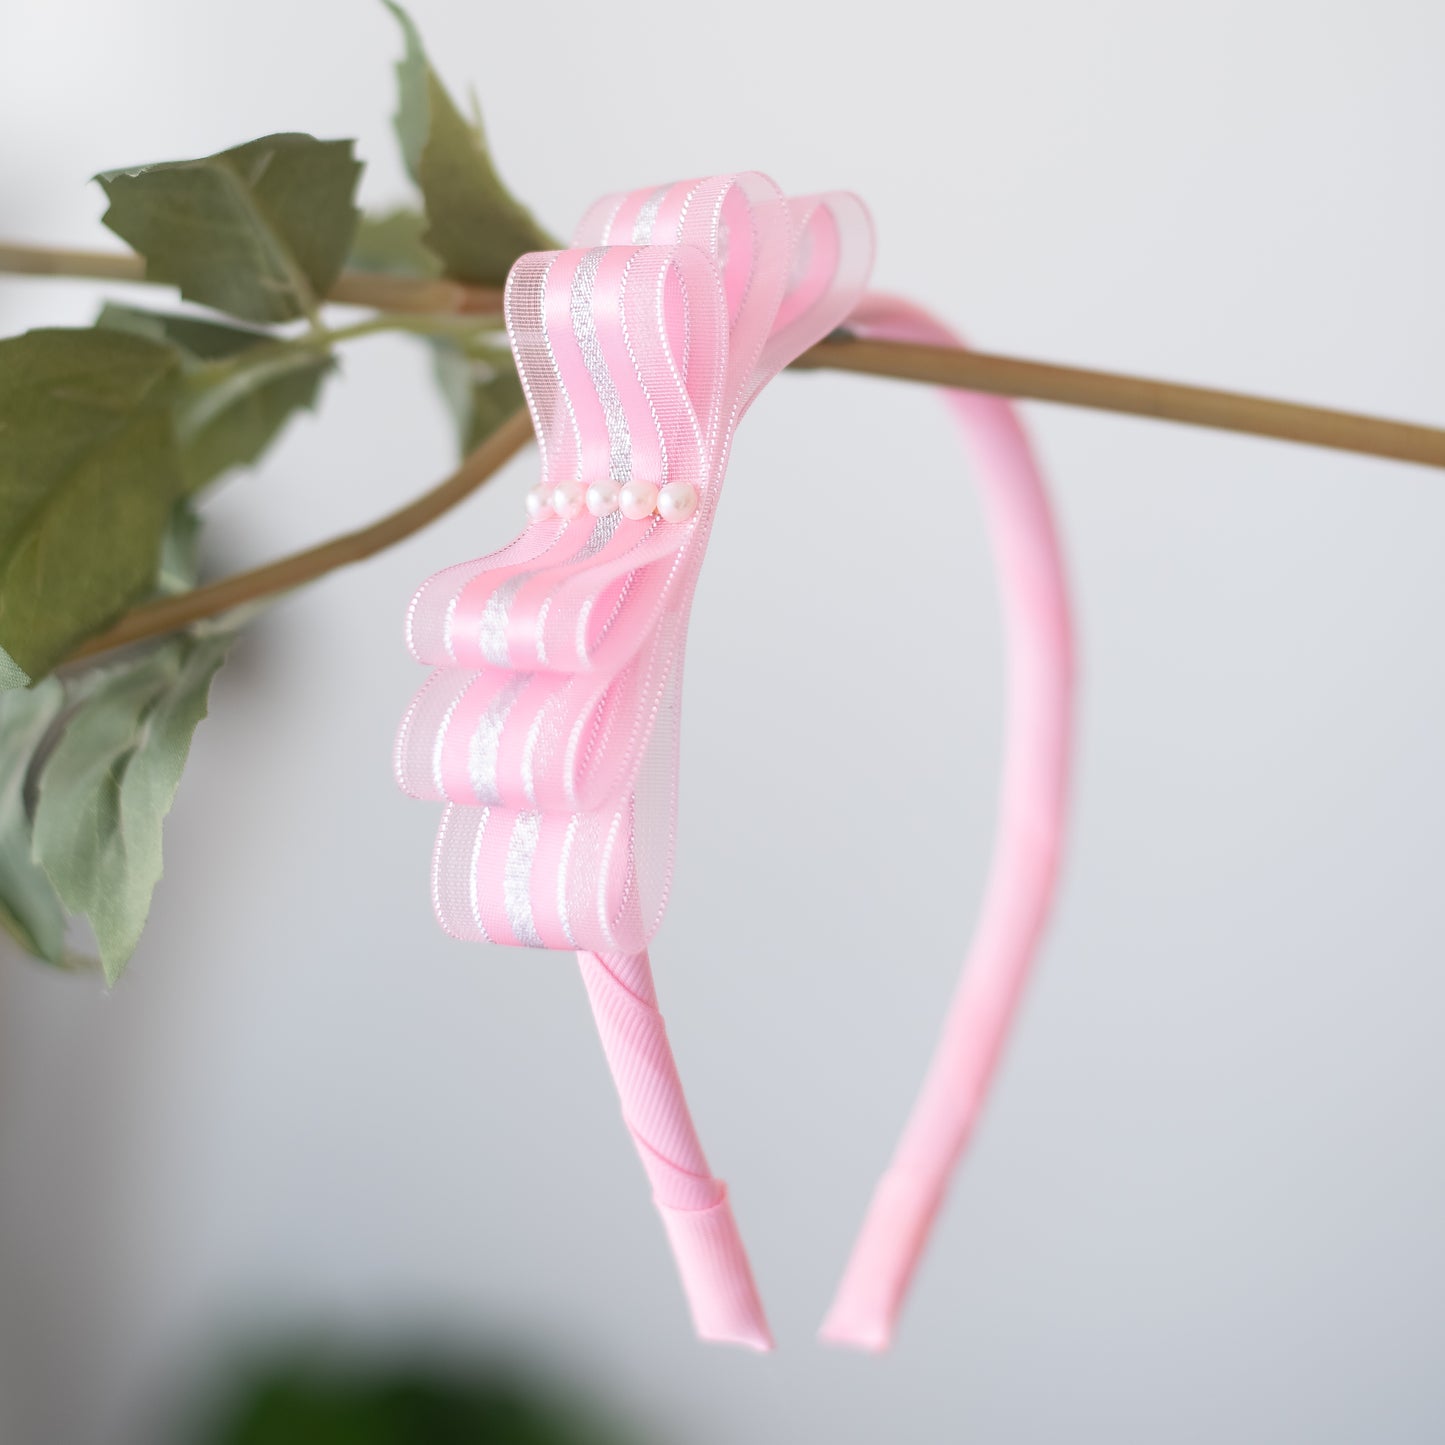 A shiny organza loopy bow hairband (1 nos) - Pink, Silver